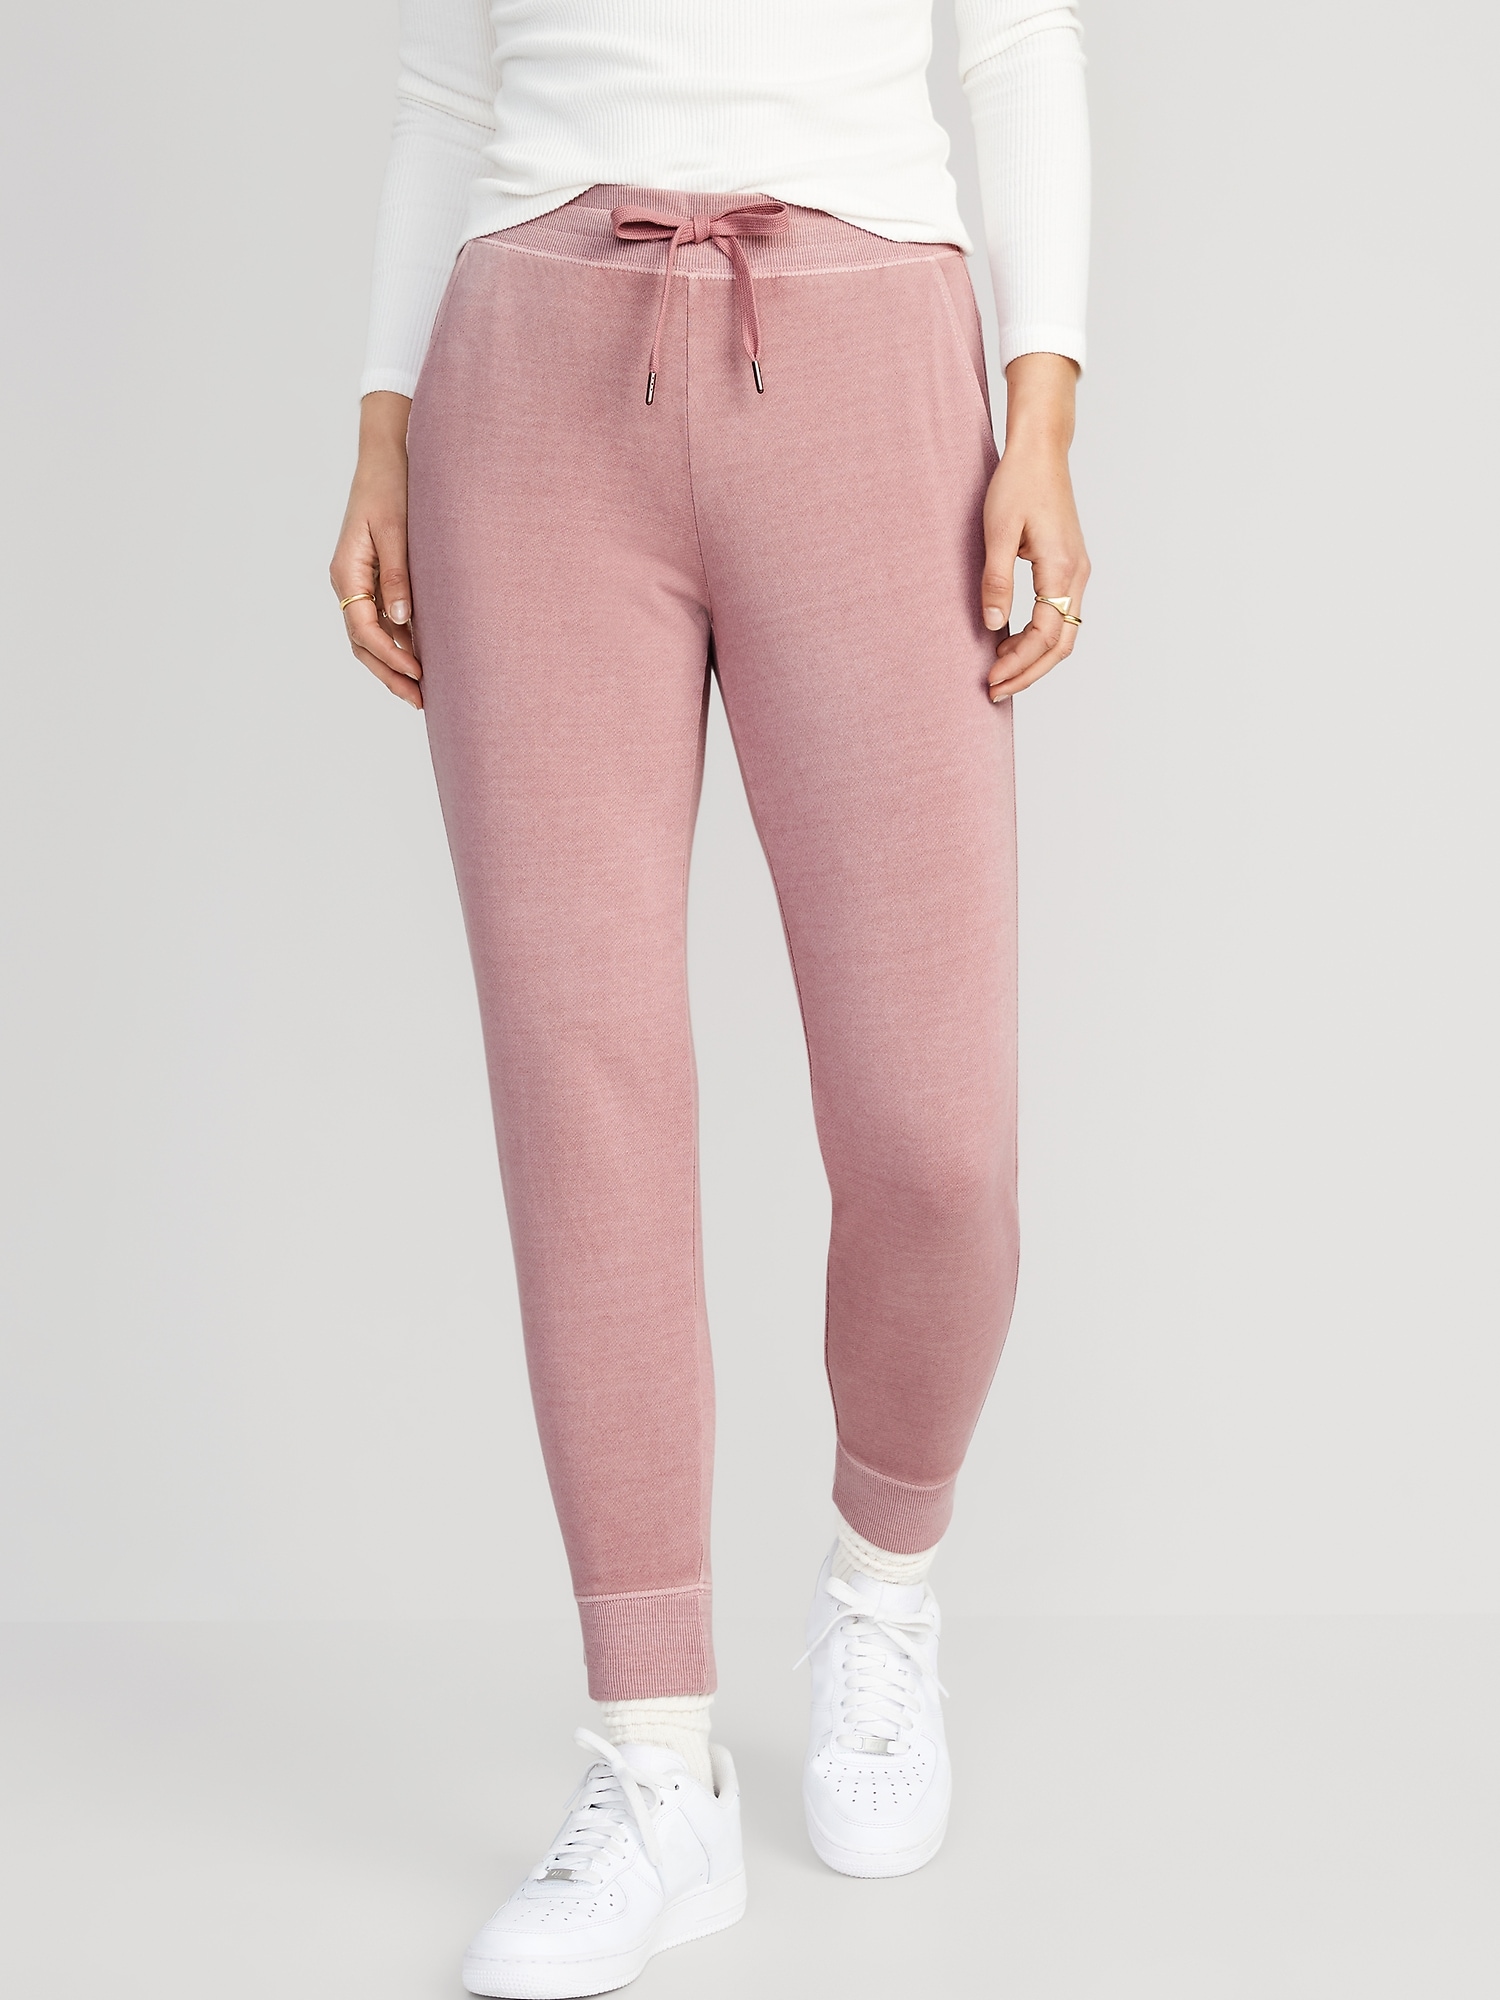 Old Navy Mid-Rise Vintage Street Jogger Sweatpants for Women pink. 1